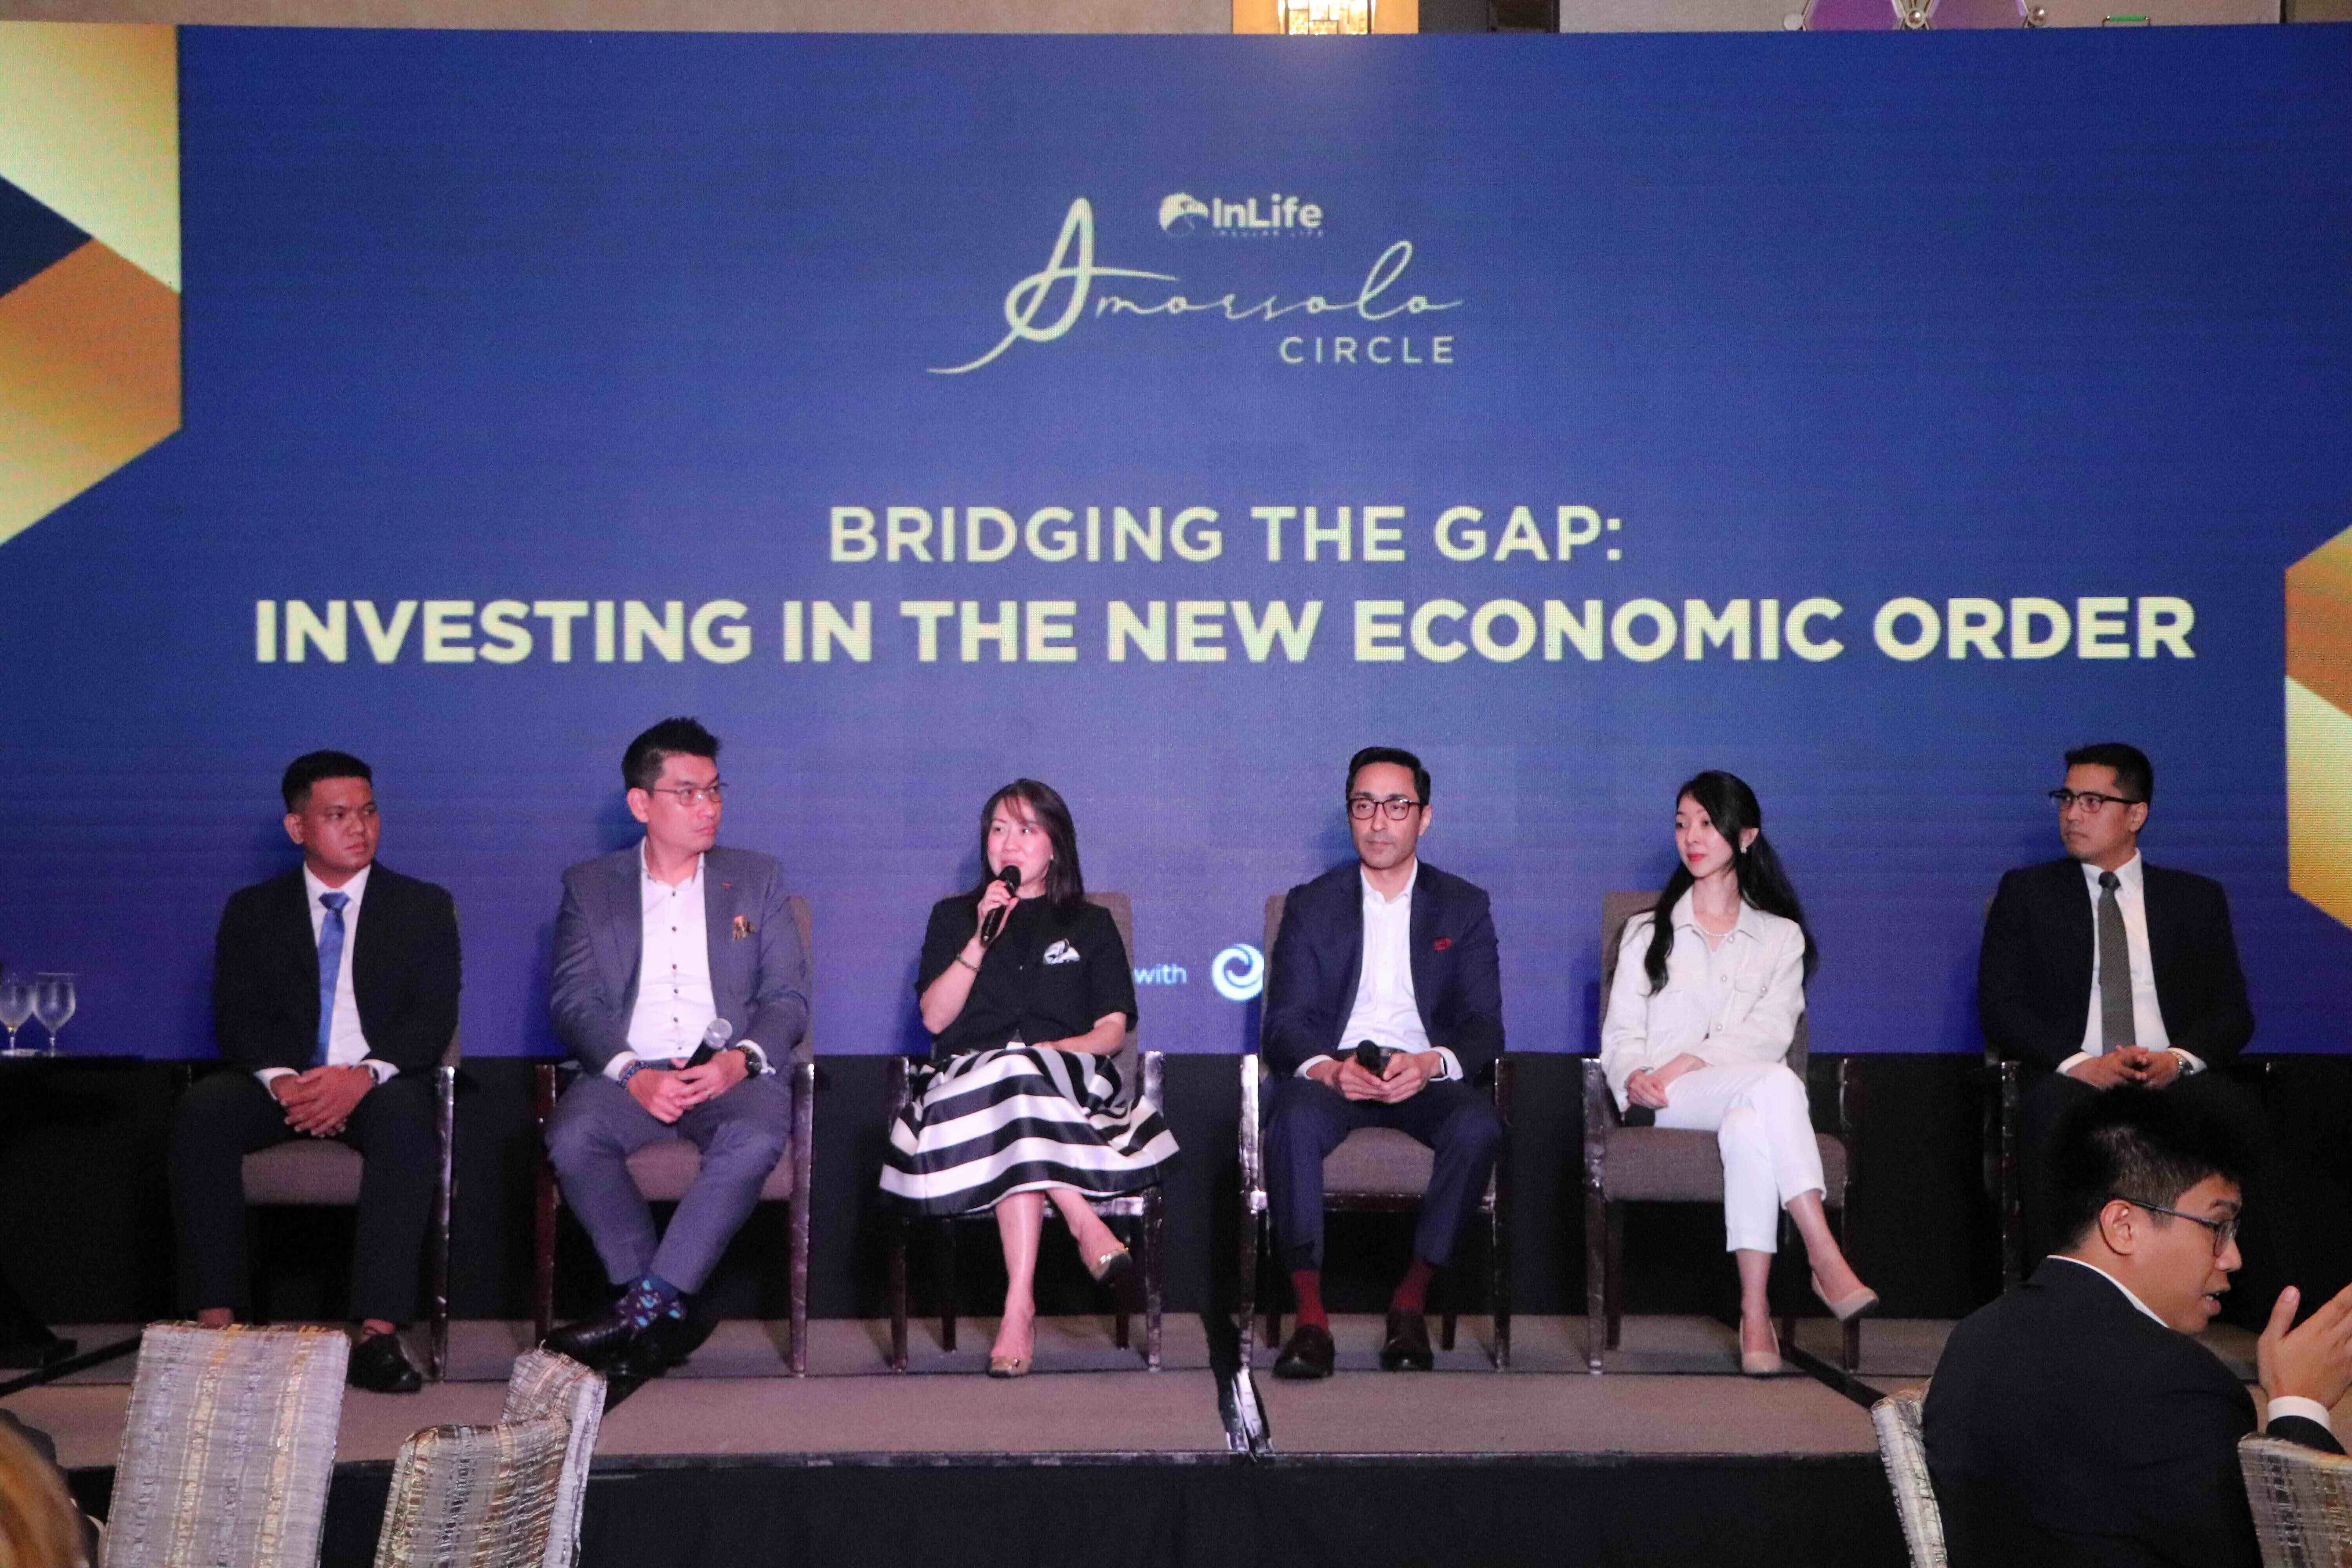 inlife-s-amorsolo-circle-members-get-tips-on-investing-in-the-new-economic-order